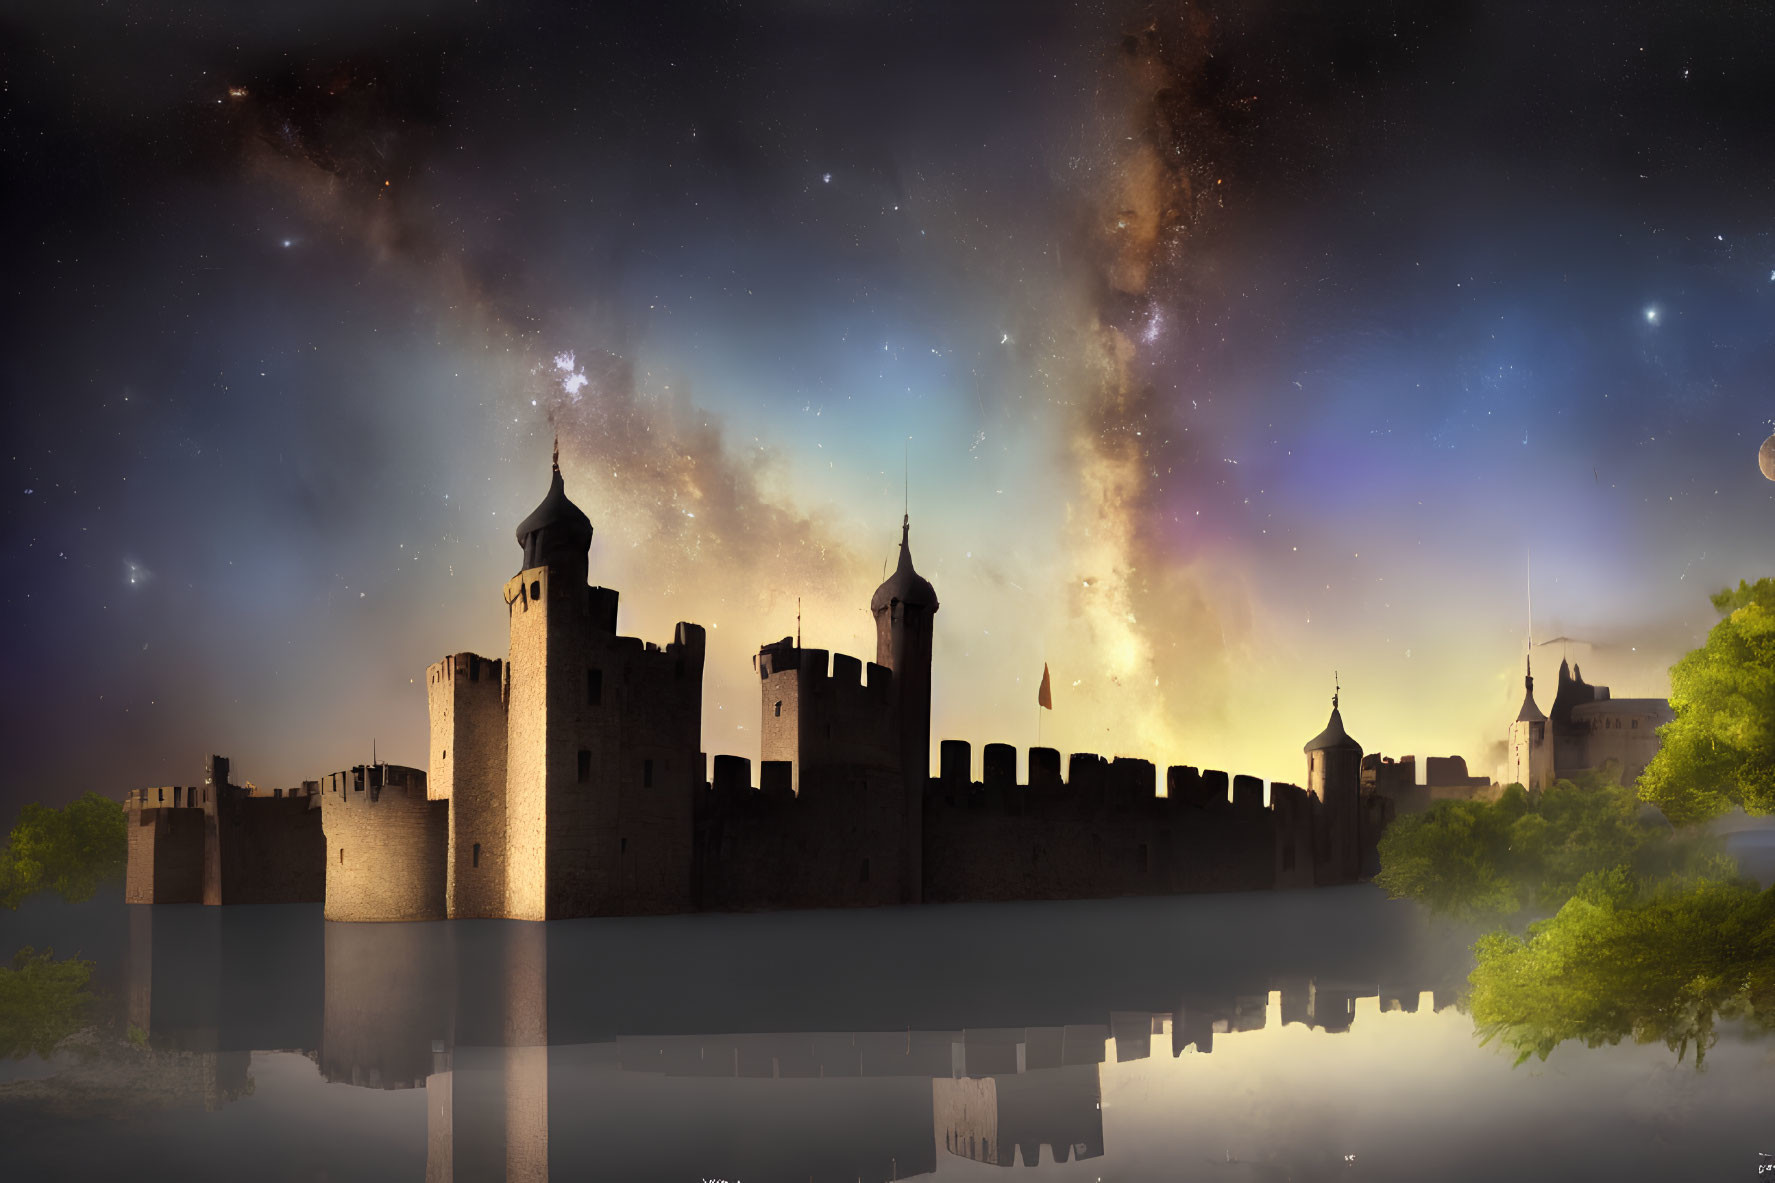 Medieval castle with spires and turrets reflecting in tranquil waters under starry sky.